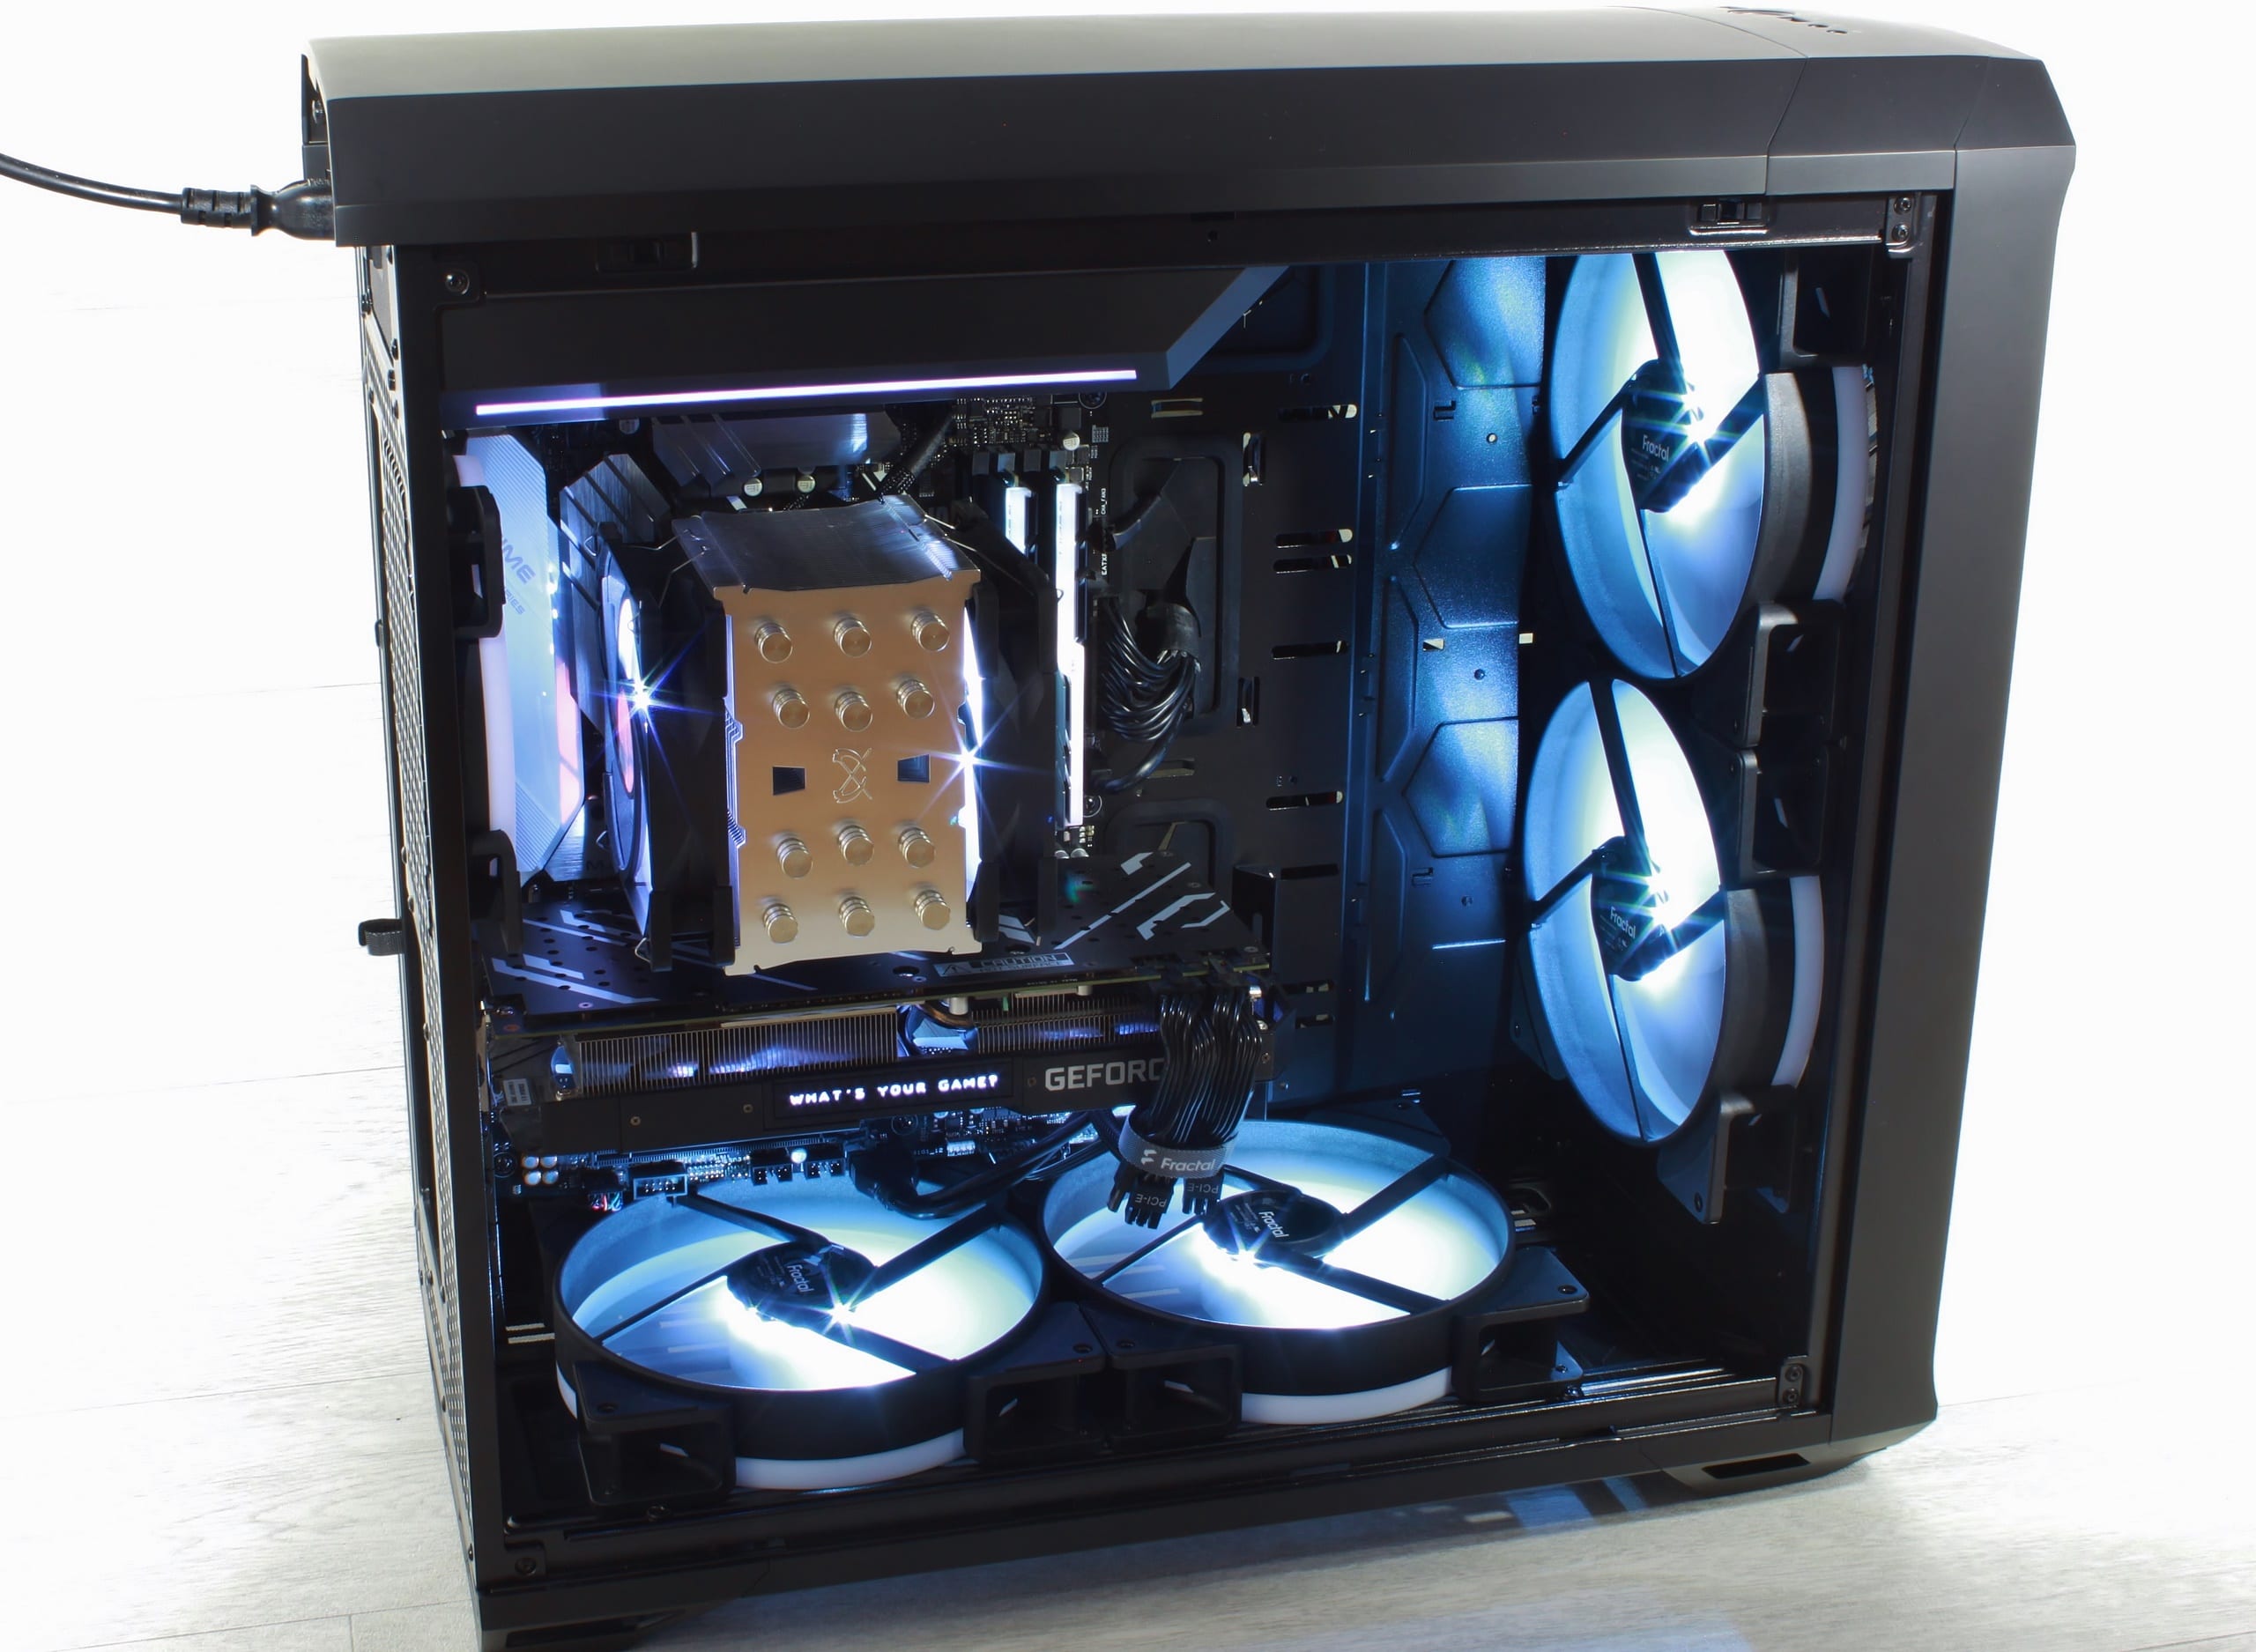 Let there be air: Fractal Design Torrent RGB Review - Airflow test with four 180mm fans as a follow-up